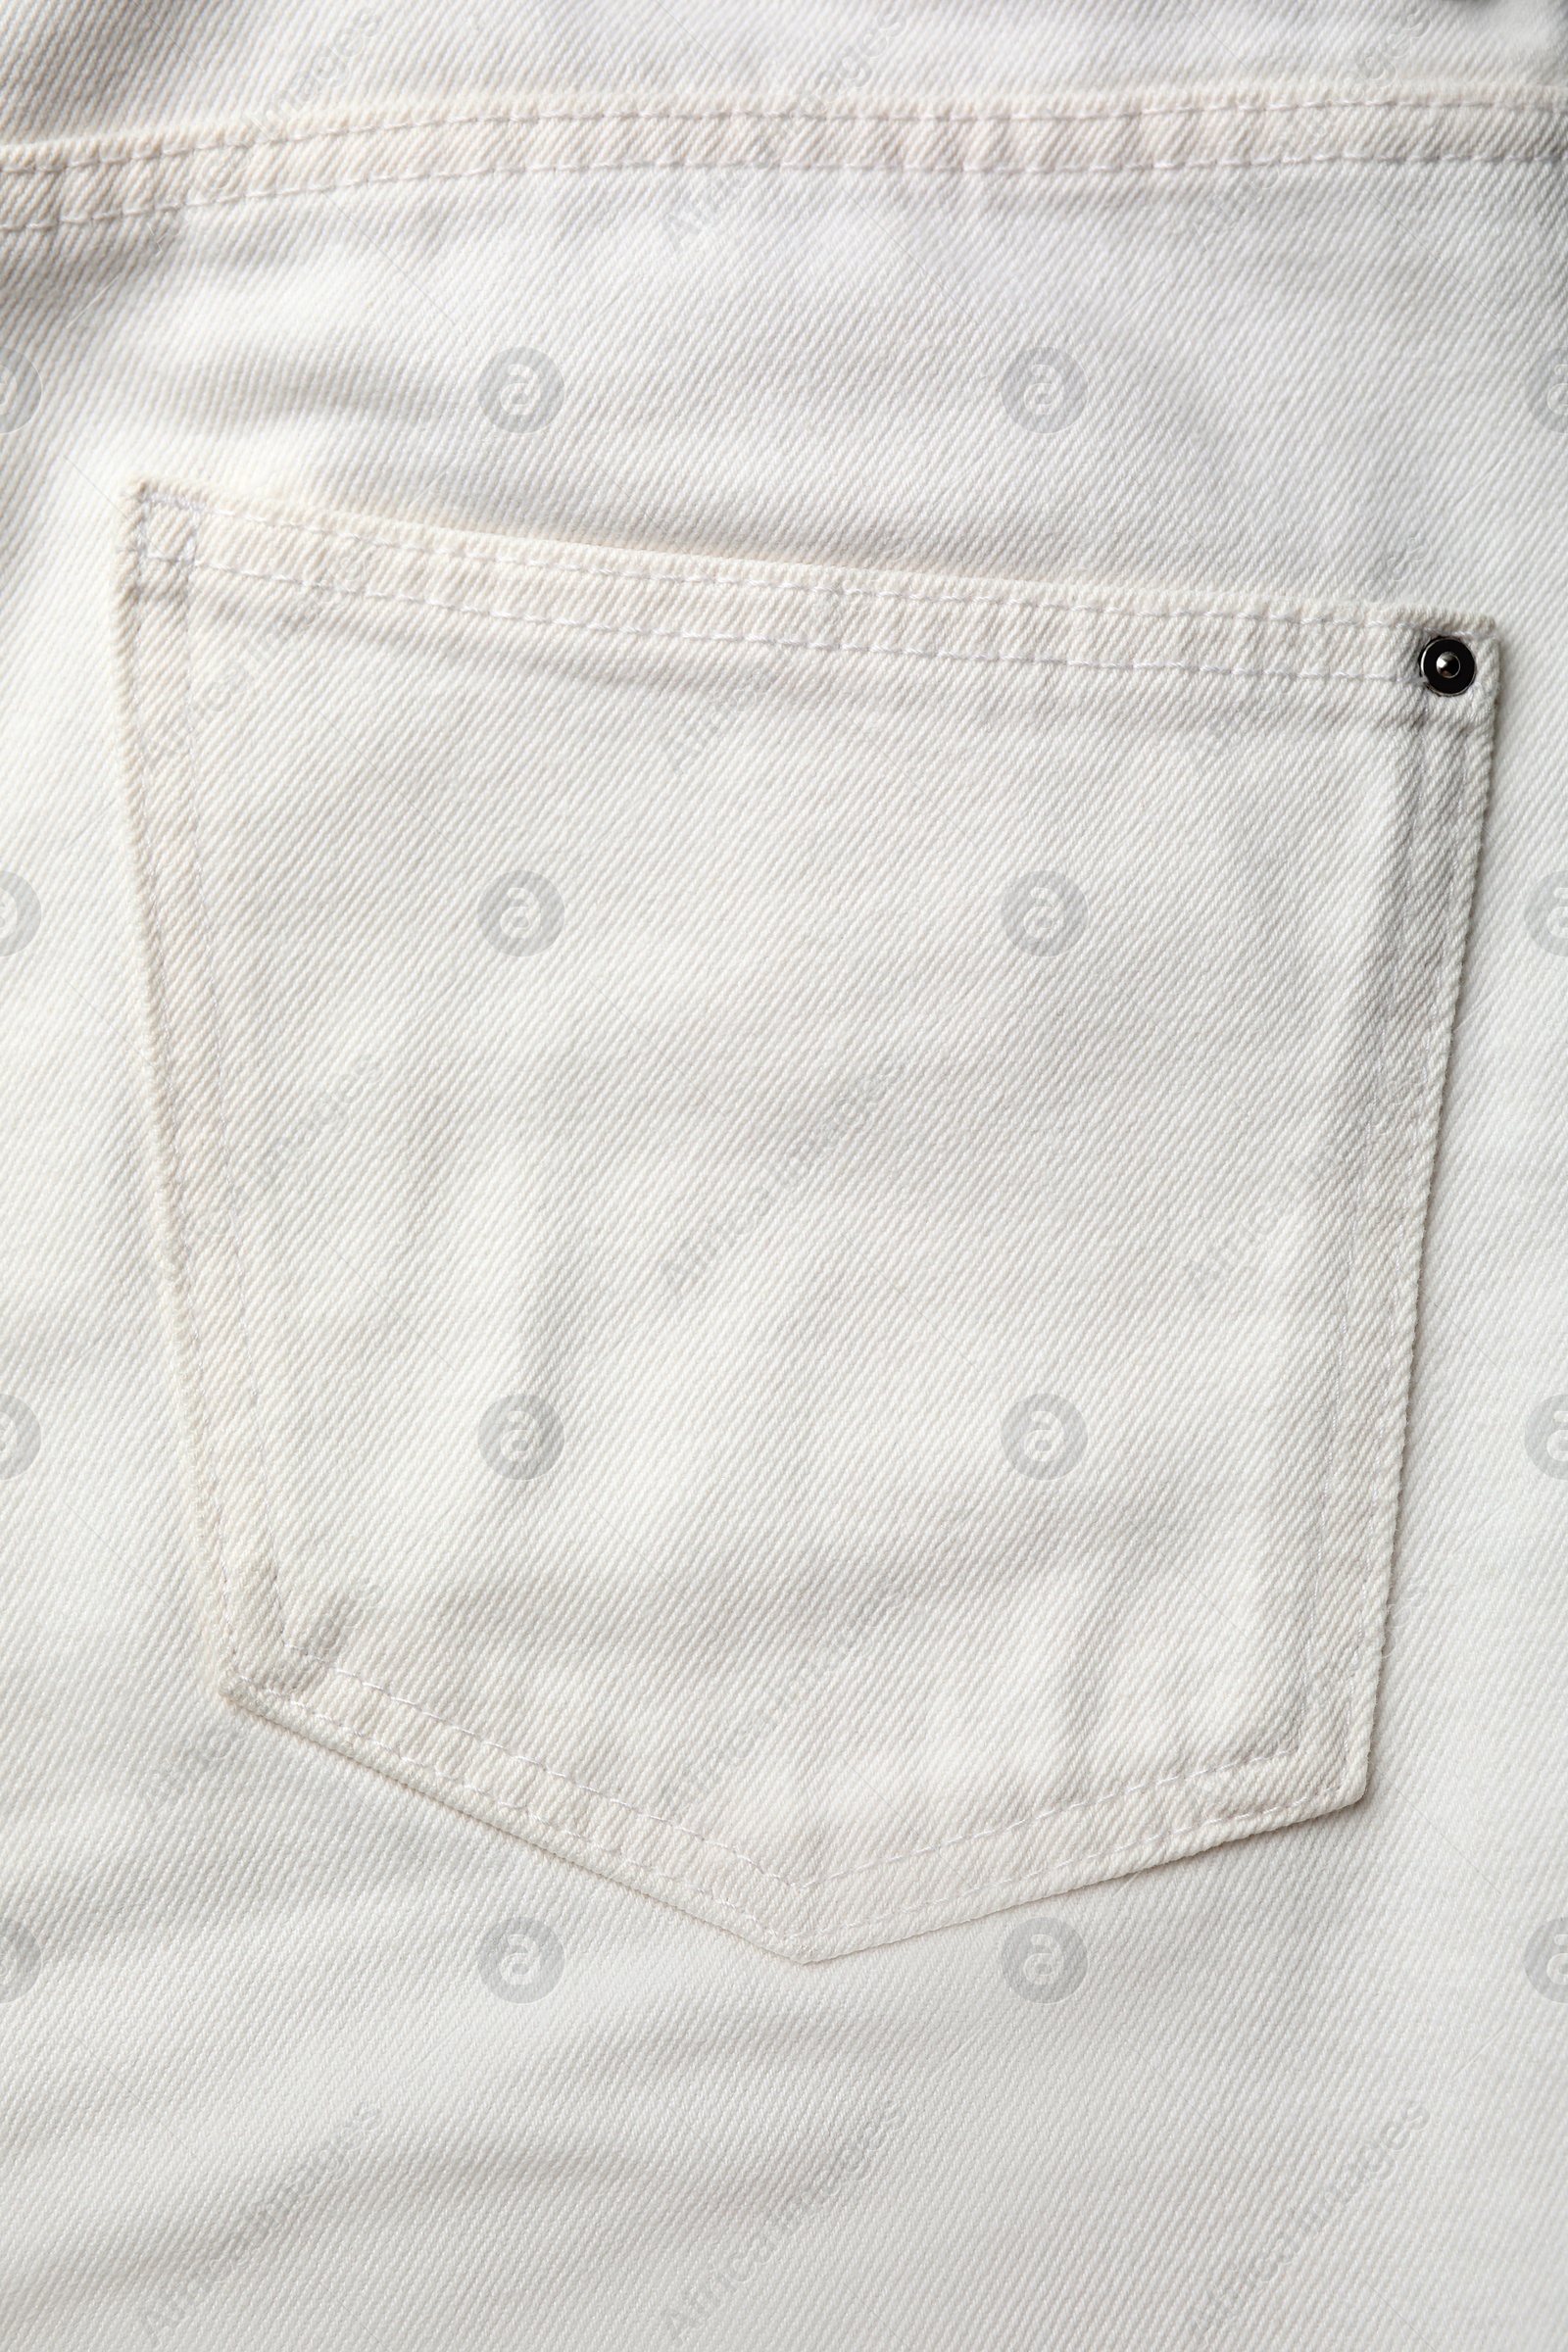 Photo of White jeans with pocket as background, top view